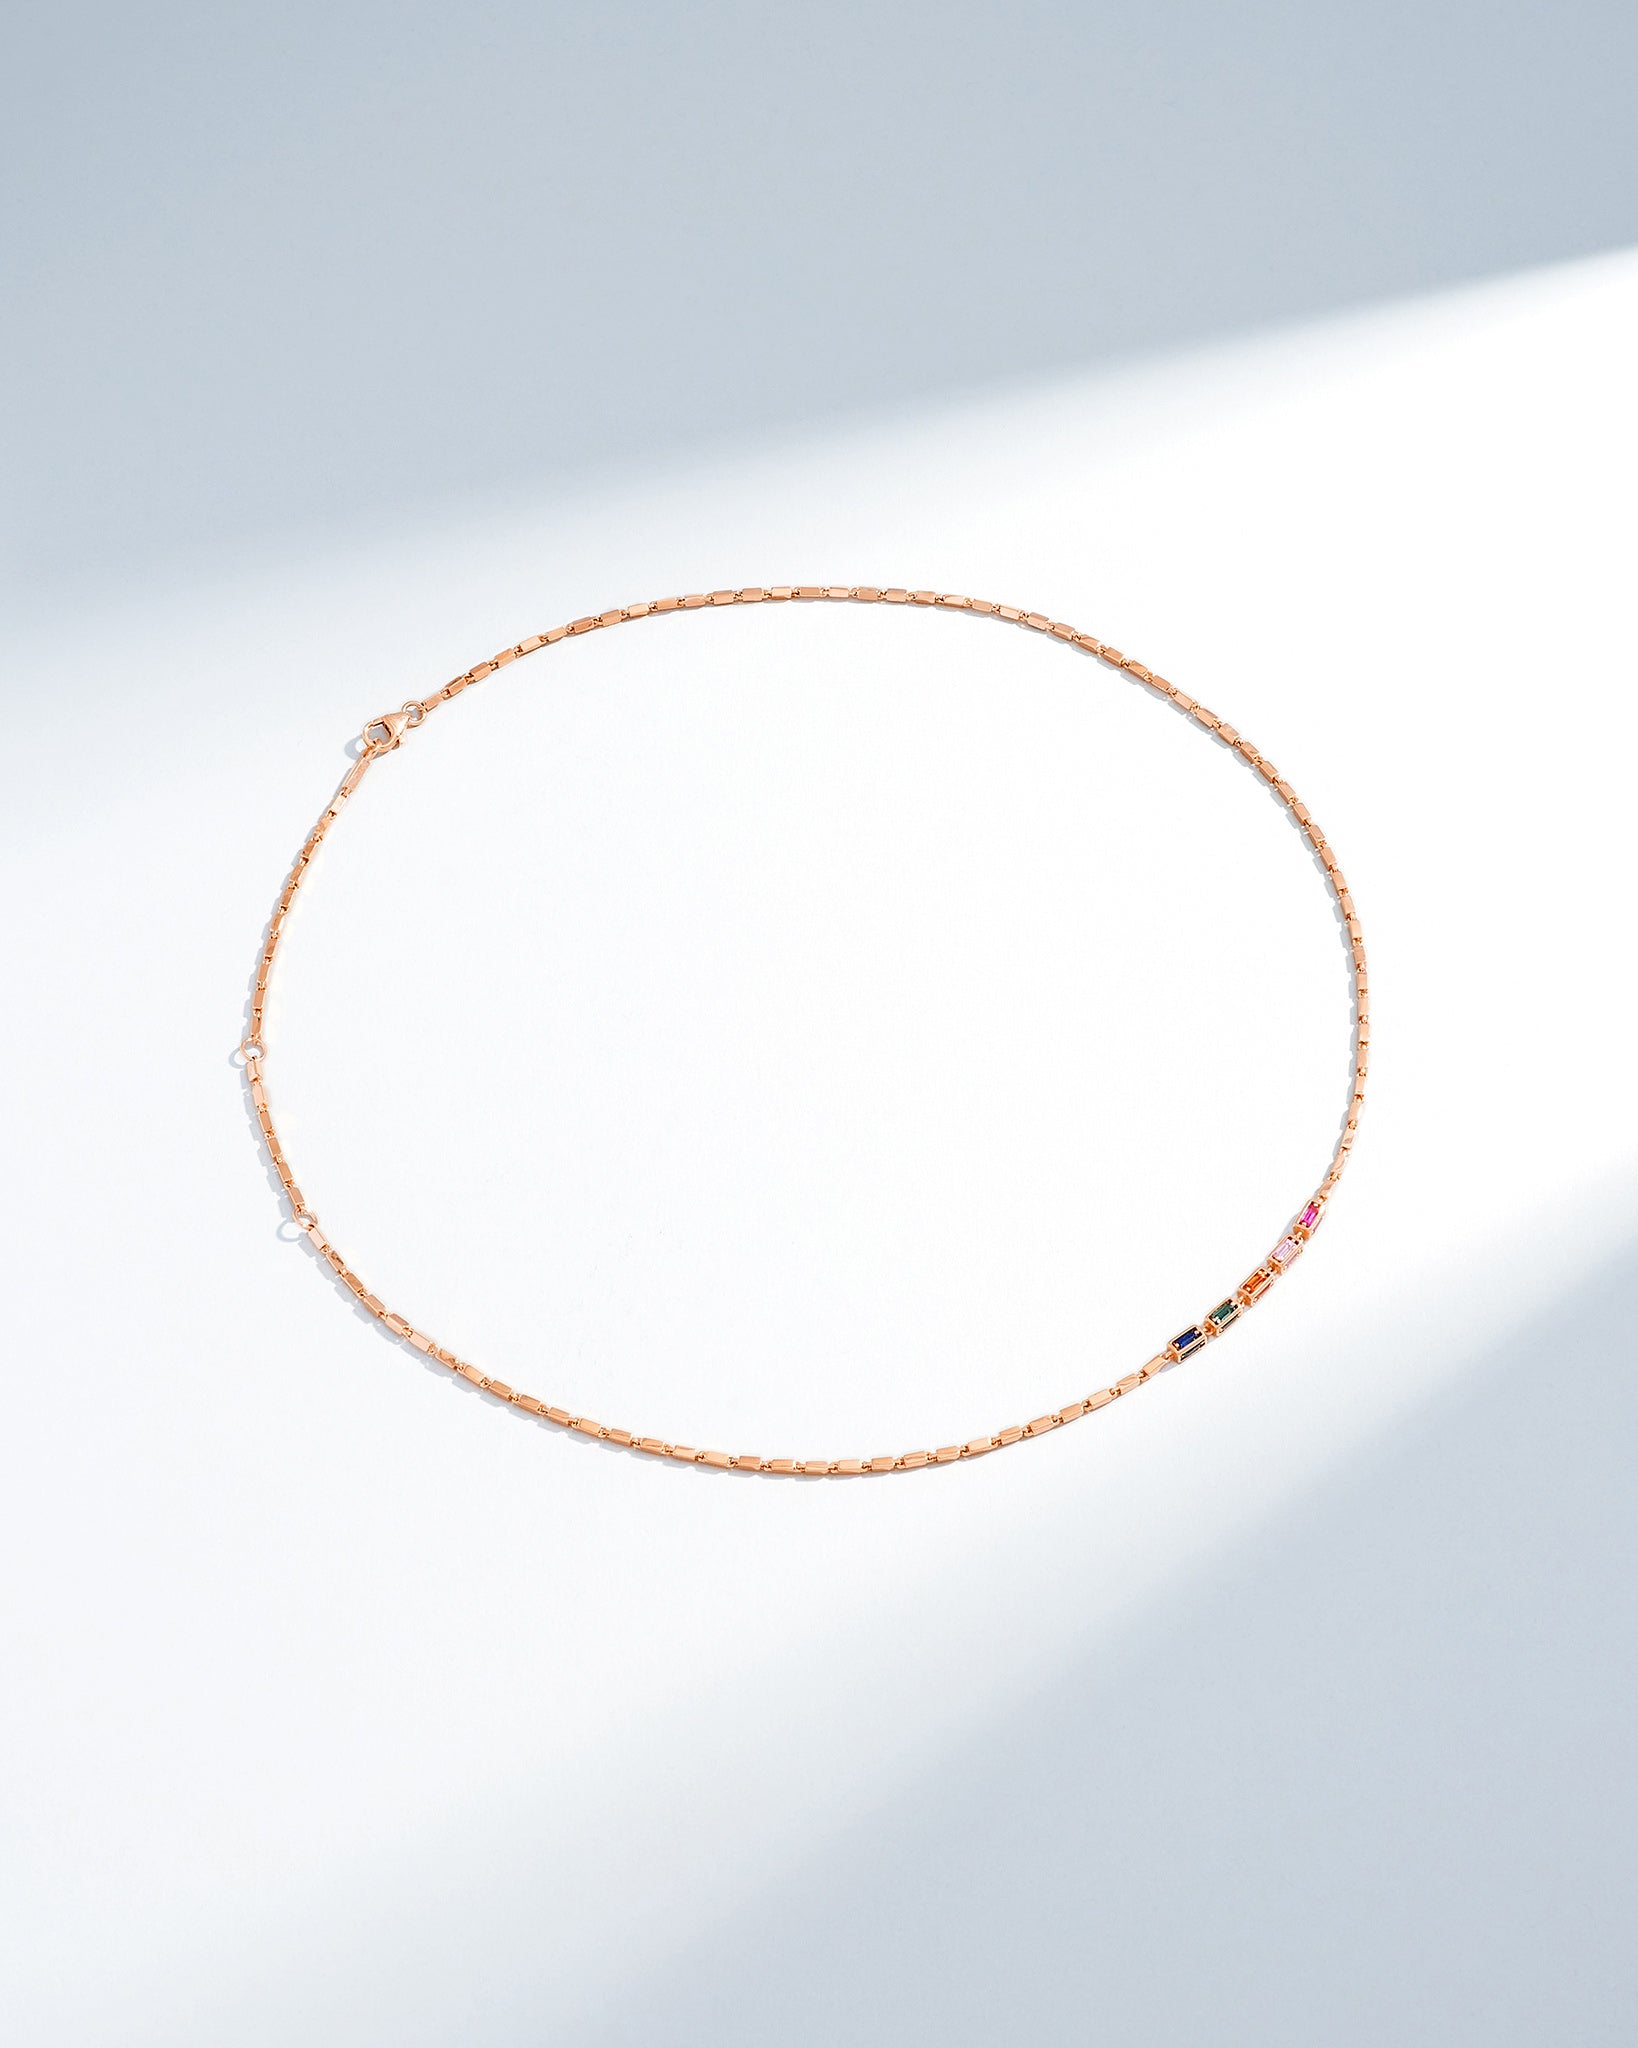 Suzanne Kalan Block-Chain Multi Rainbow Sapphire Thin Necklace in 18k rose gold